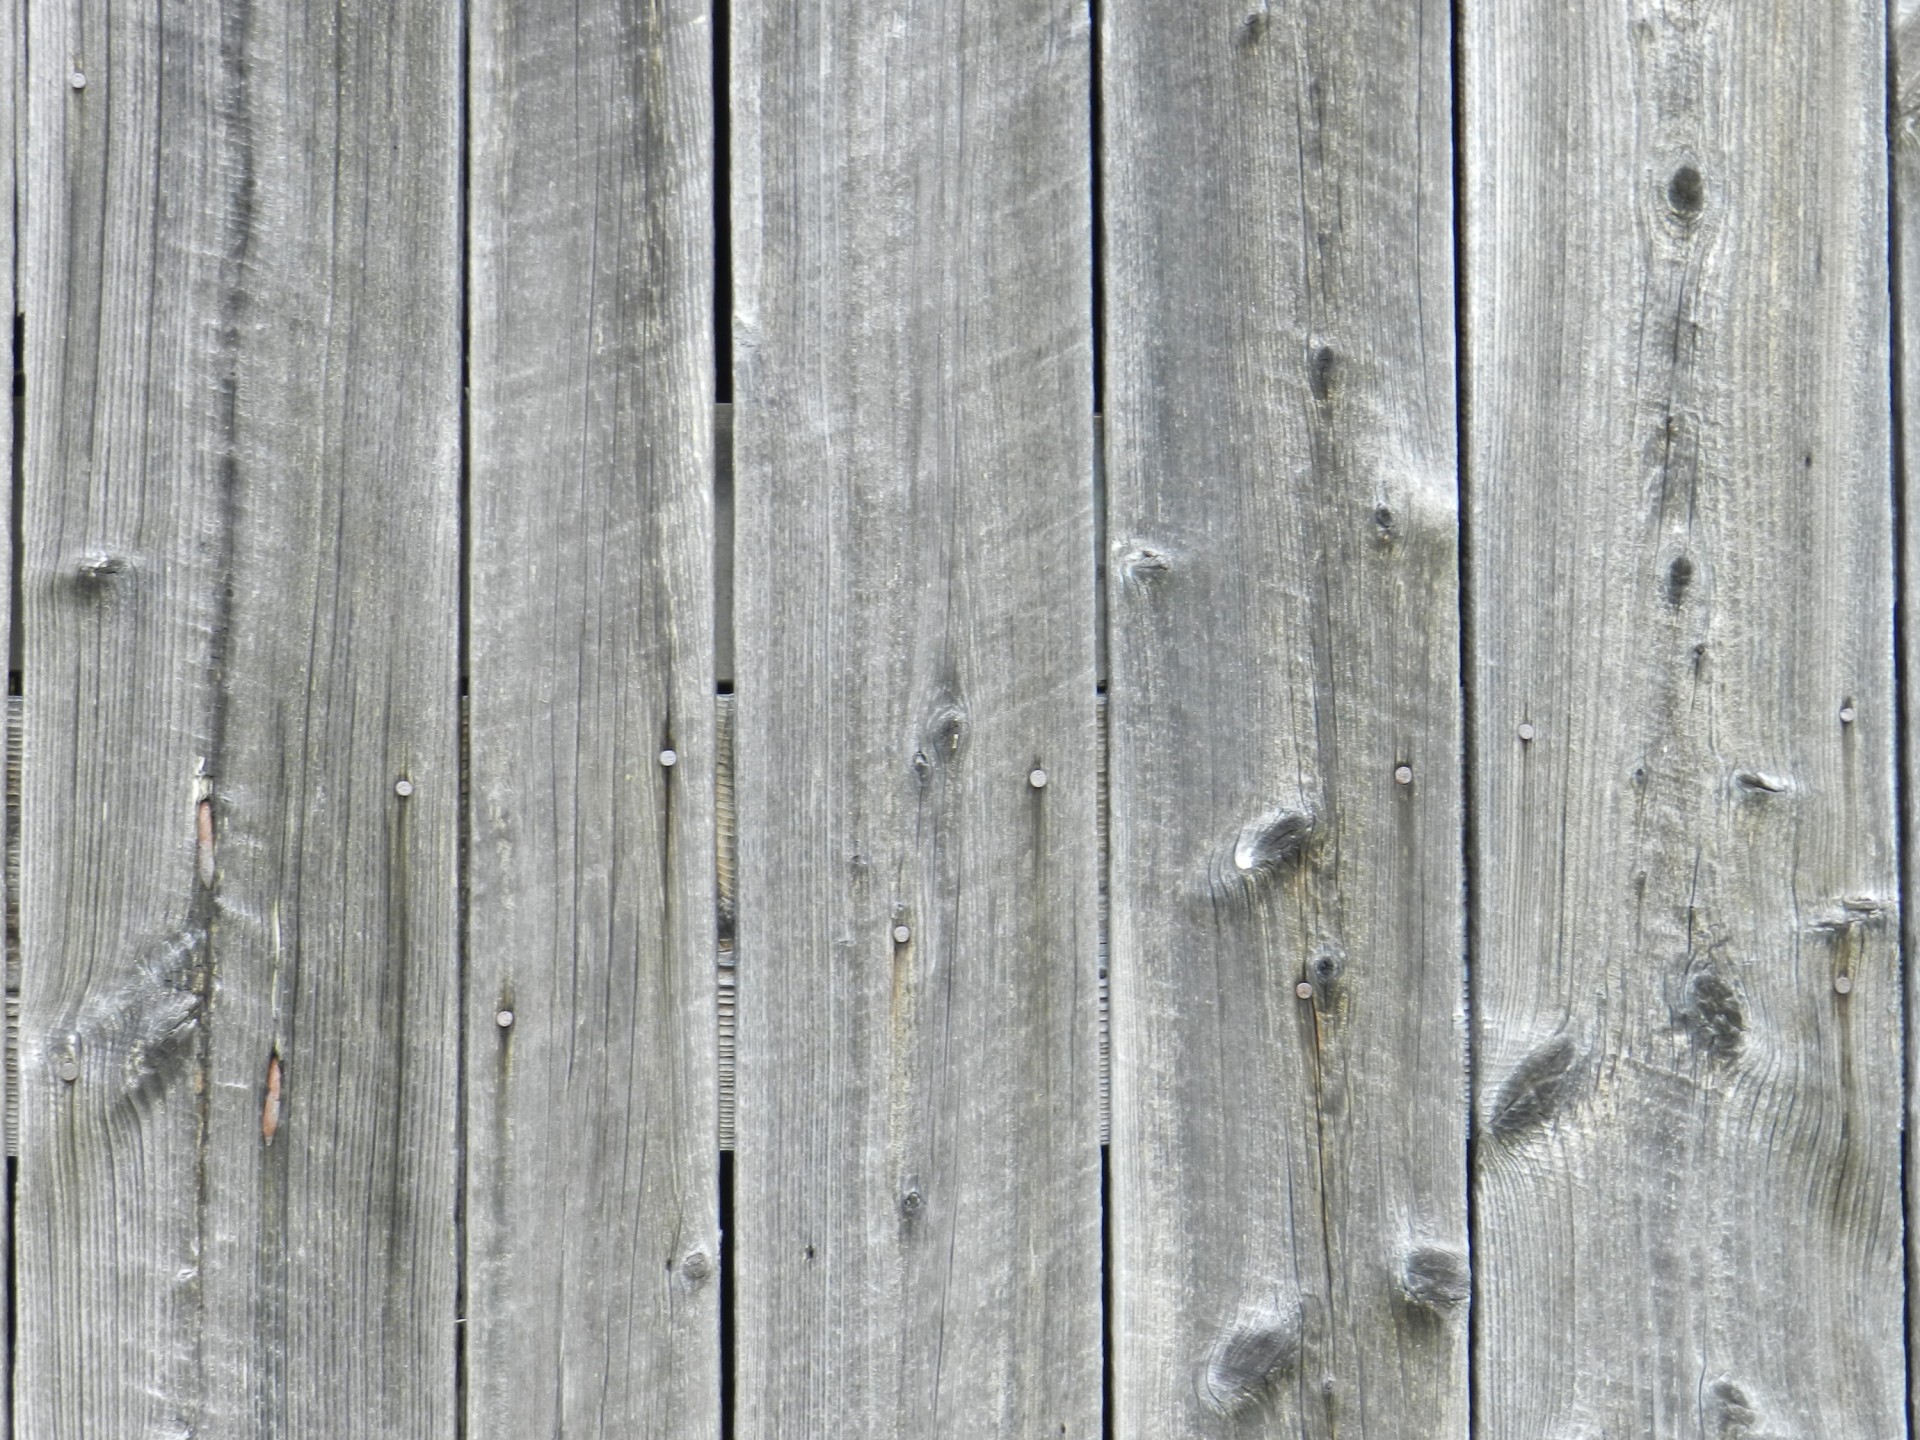 Barn Wood 8 Free Stock Photo   Public Domain Pictures